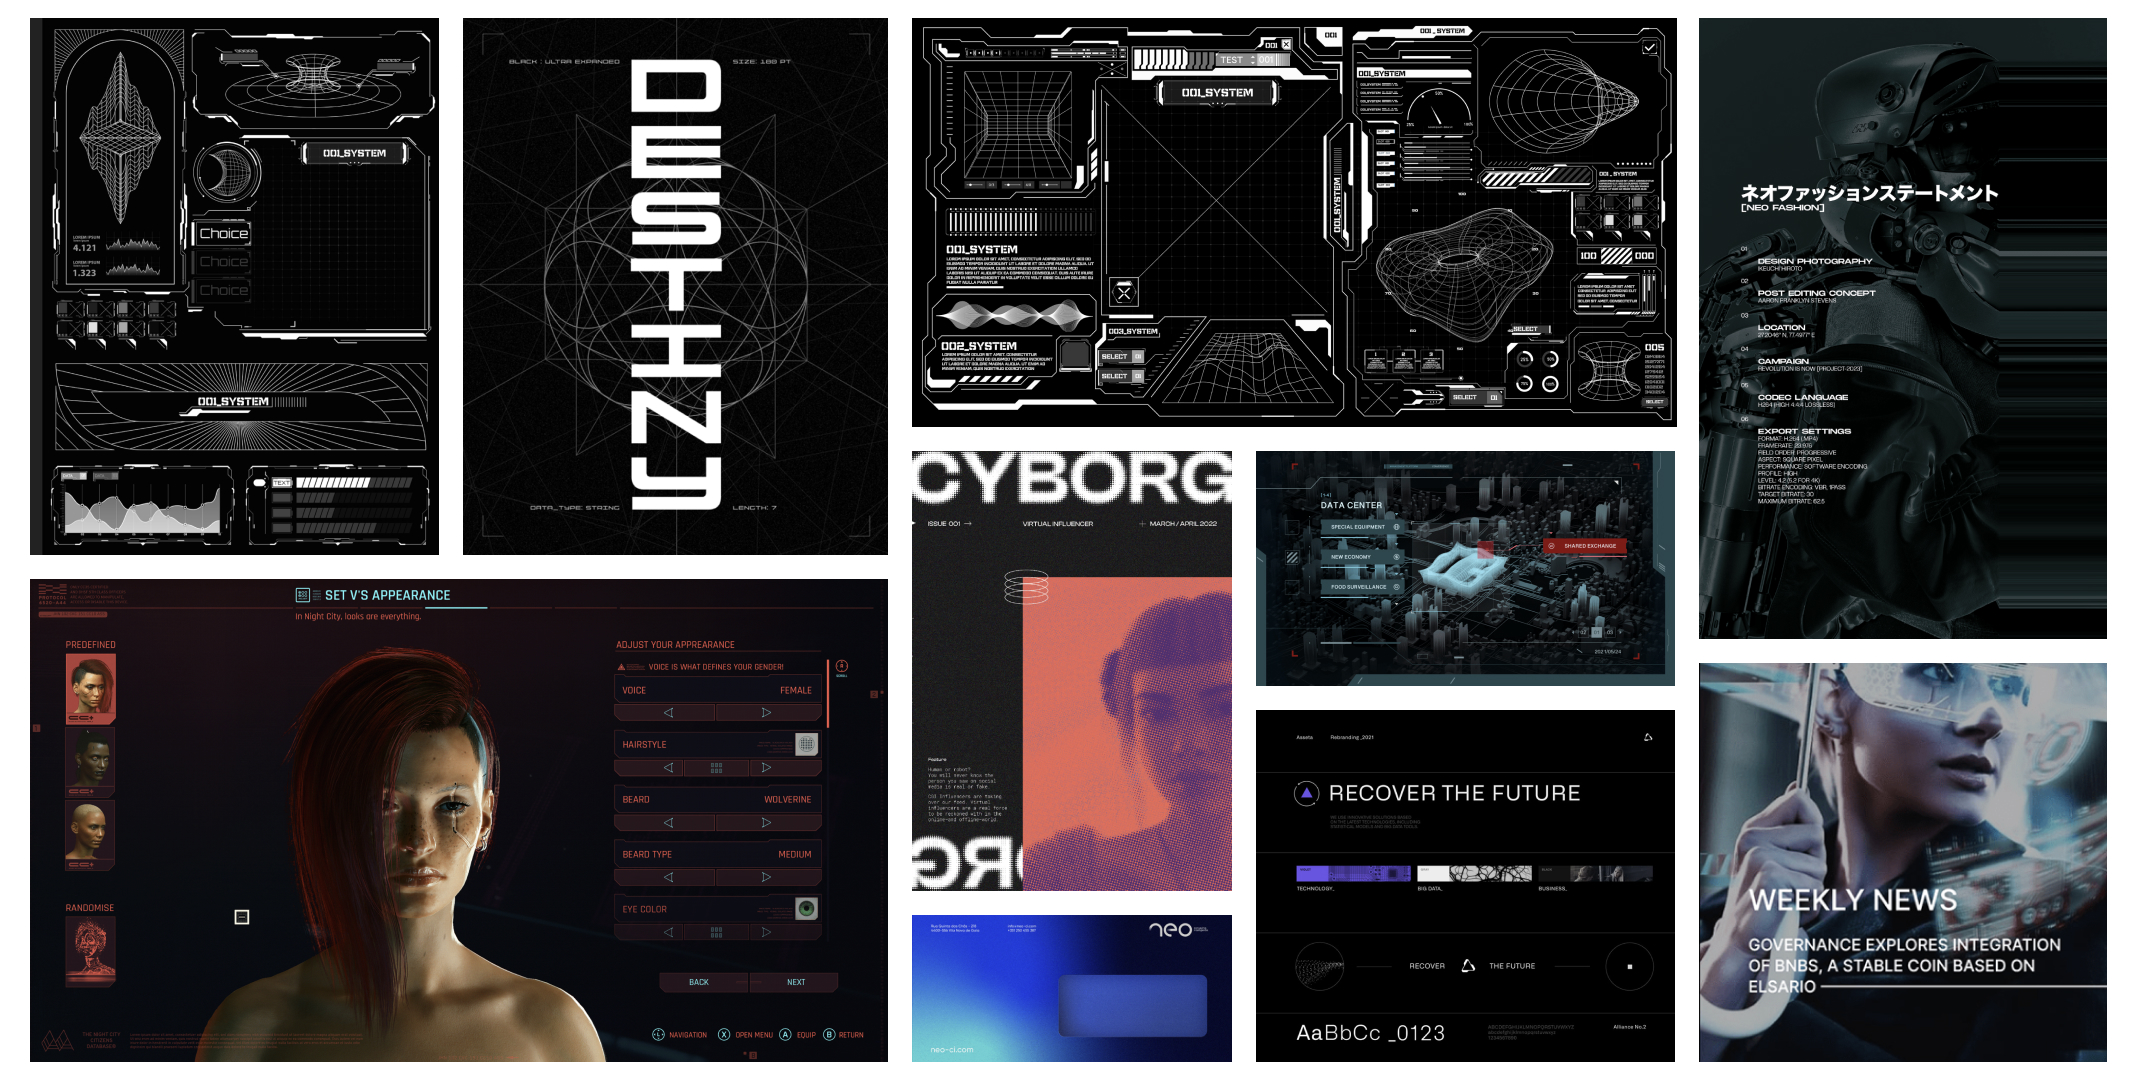 mass-effect-ui-redesign-image_moodboard-01